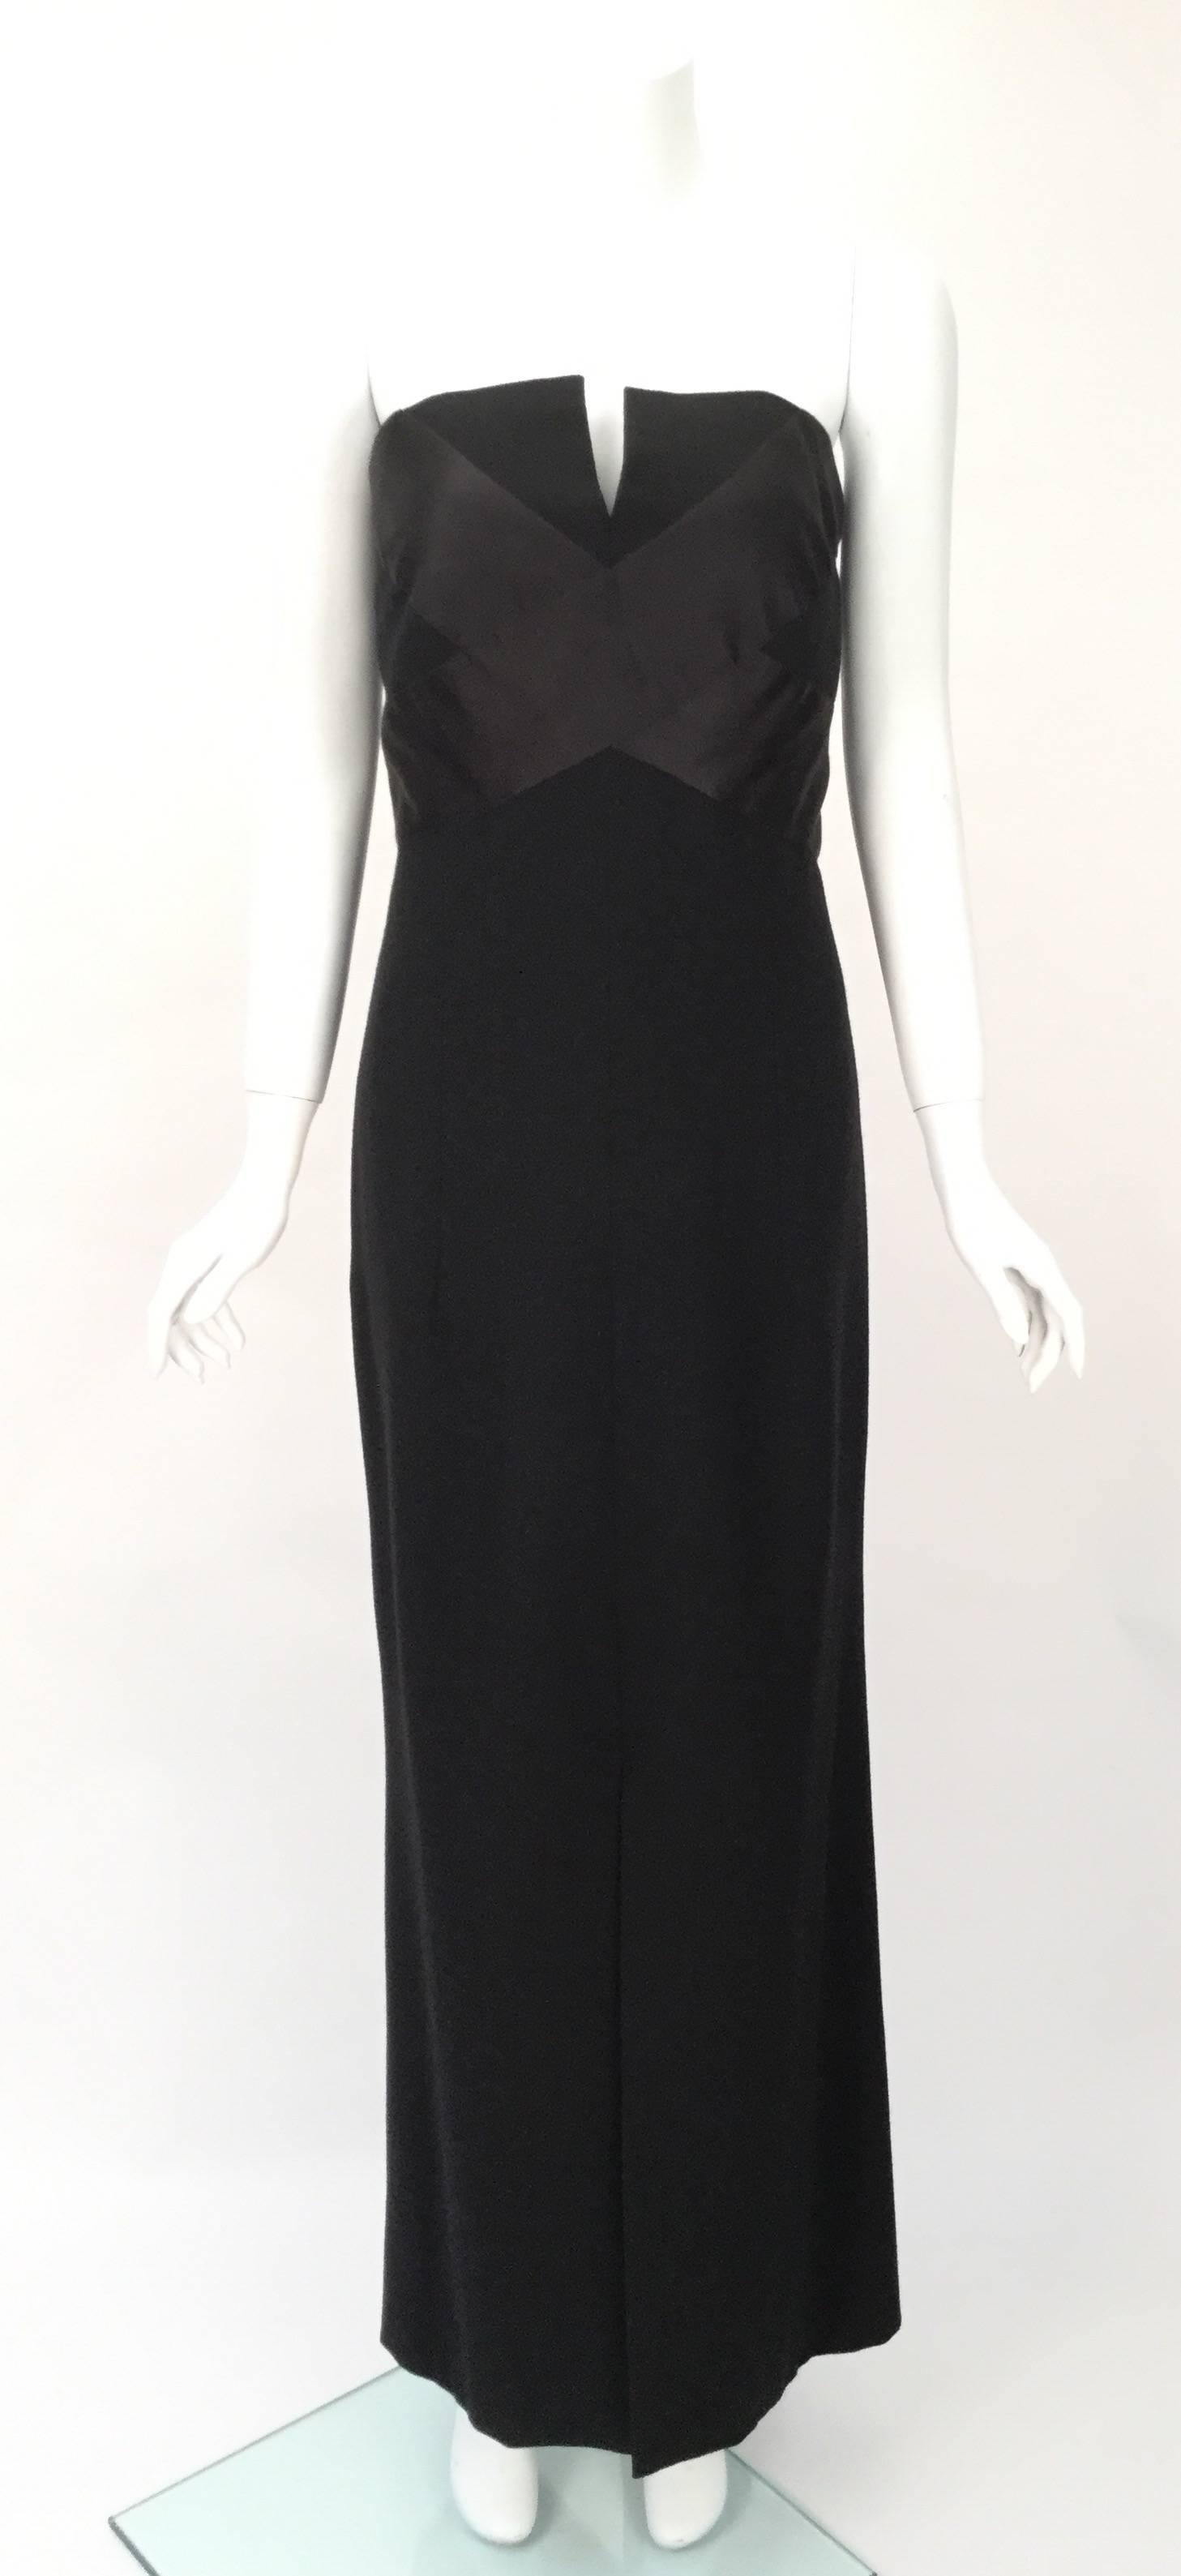 Elegant black Chanel evening dress. Constructed to flatter a full figured woman. The empire waist bodice has boning, soft wire cups, a spandex inner side back panel and a spandex inner mini skirt that covers past the hip line (built in designer